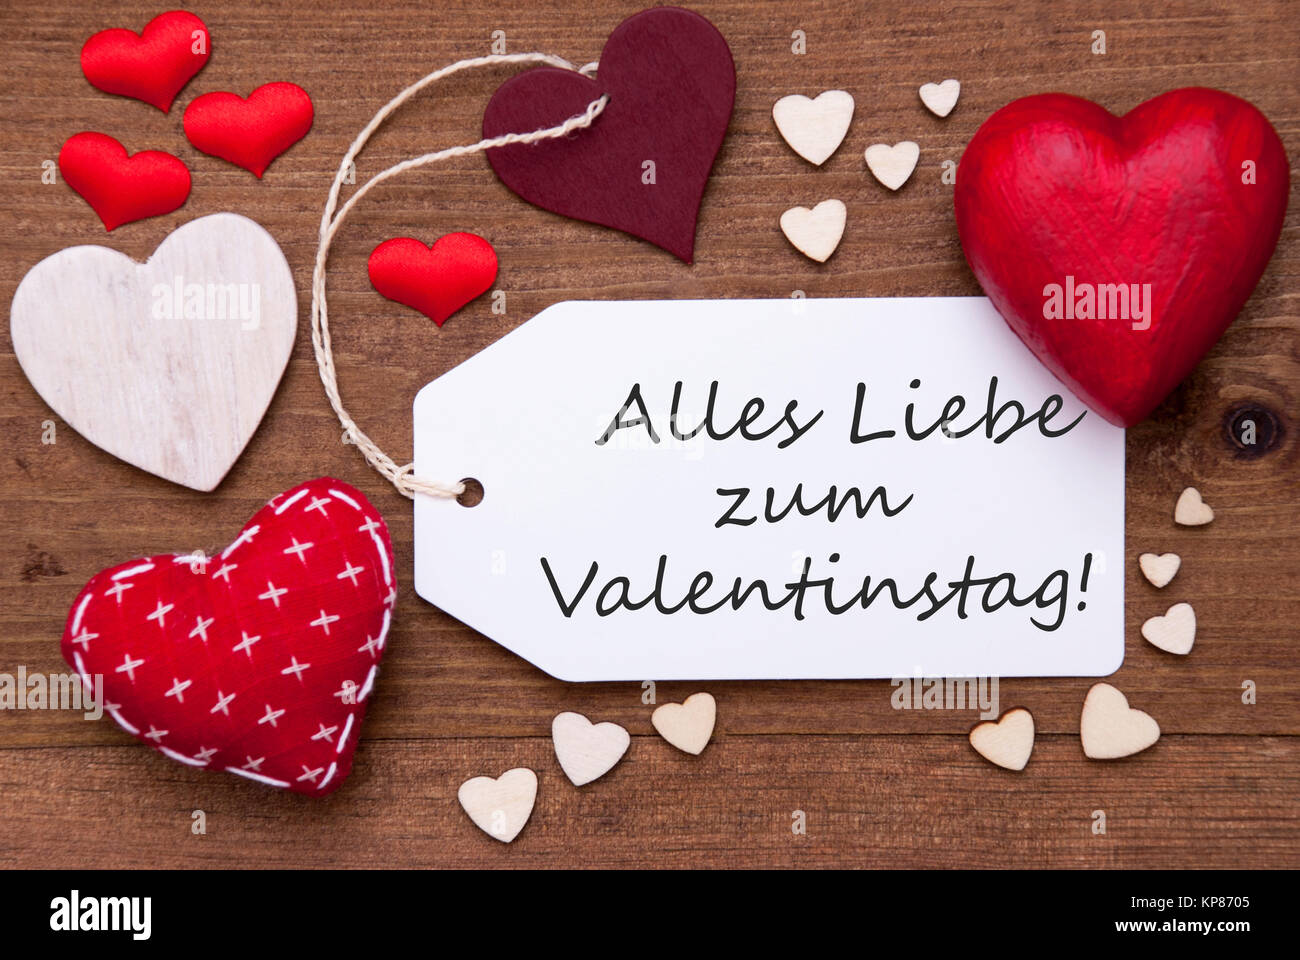 Label With Red Textile Hearts On Wooden Background. German Text Alles Liebe Zum Valentinstag Means Happy Valentines Day. Retro Or Vintage Style Stock Photo